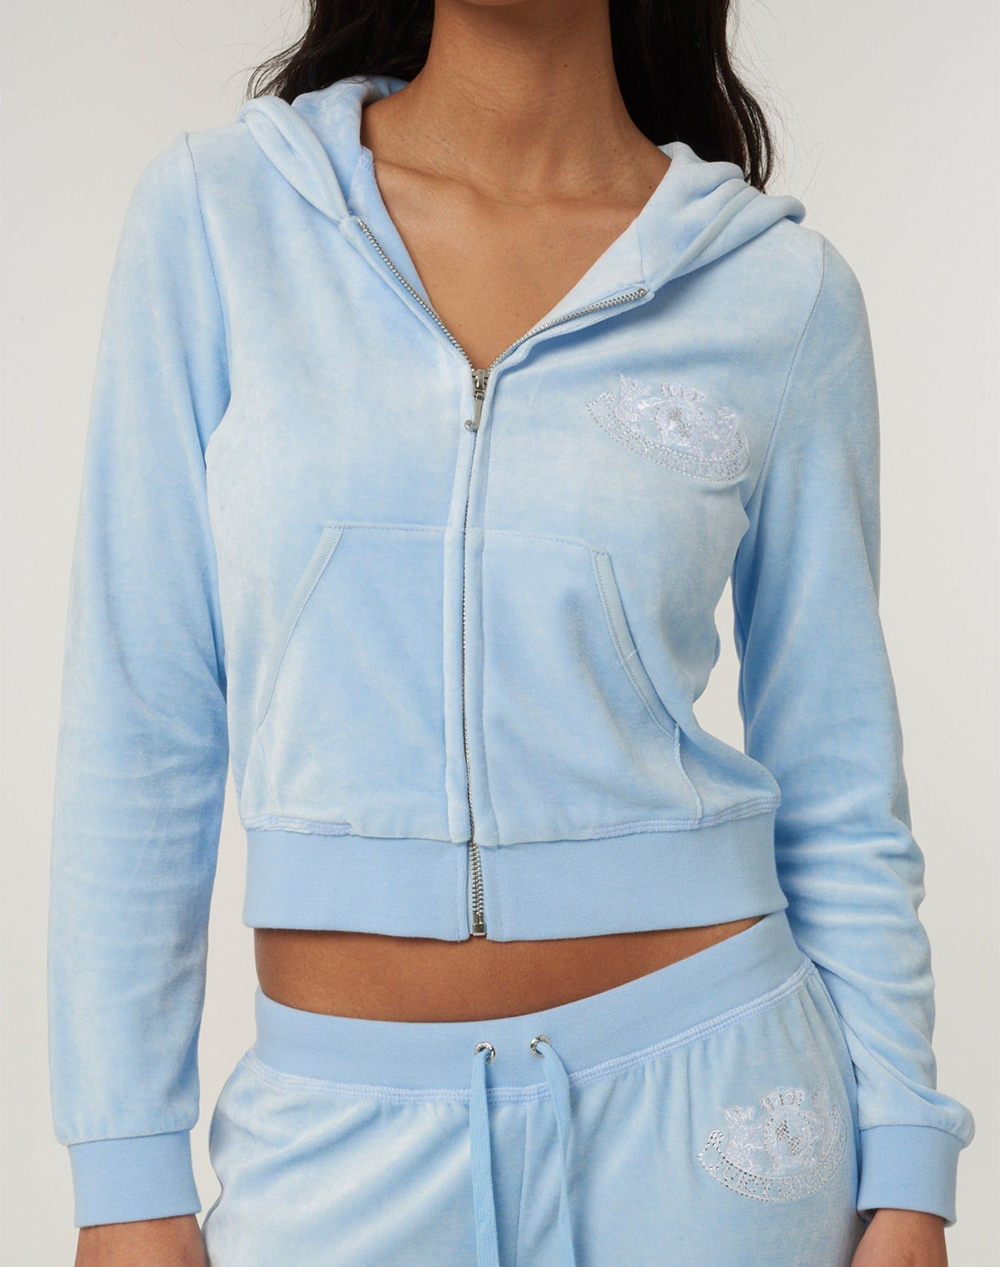 JUICY COUTURE HERITAGE DOG CREST ROBYN HOODIE